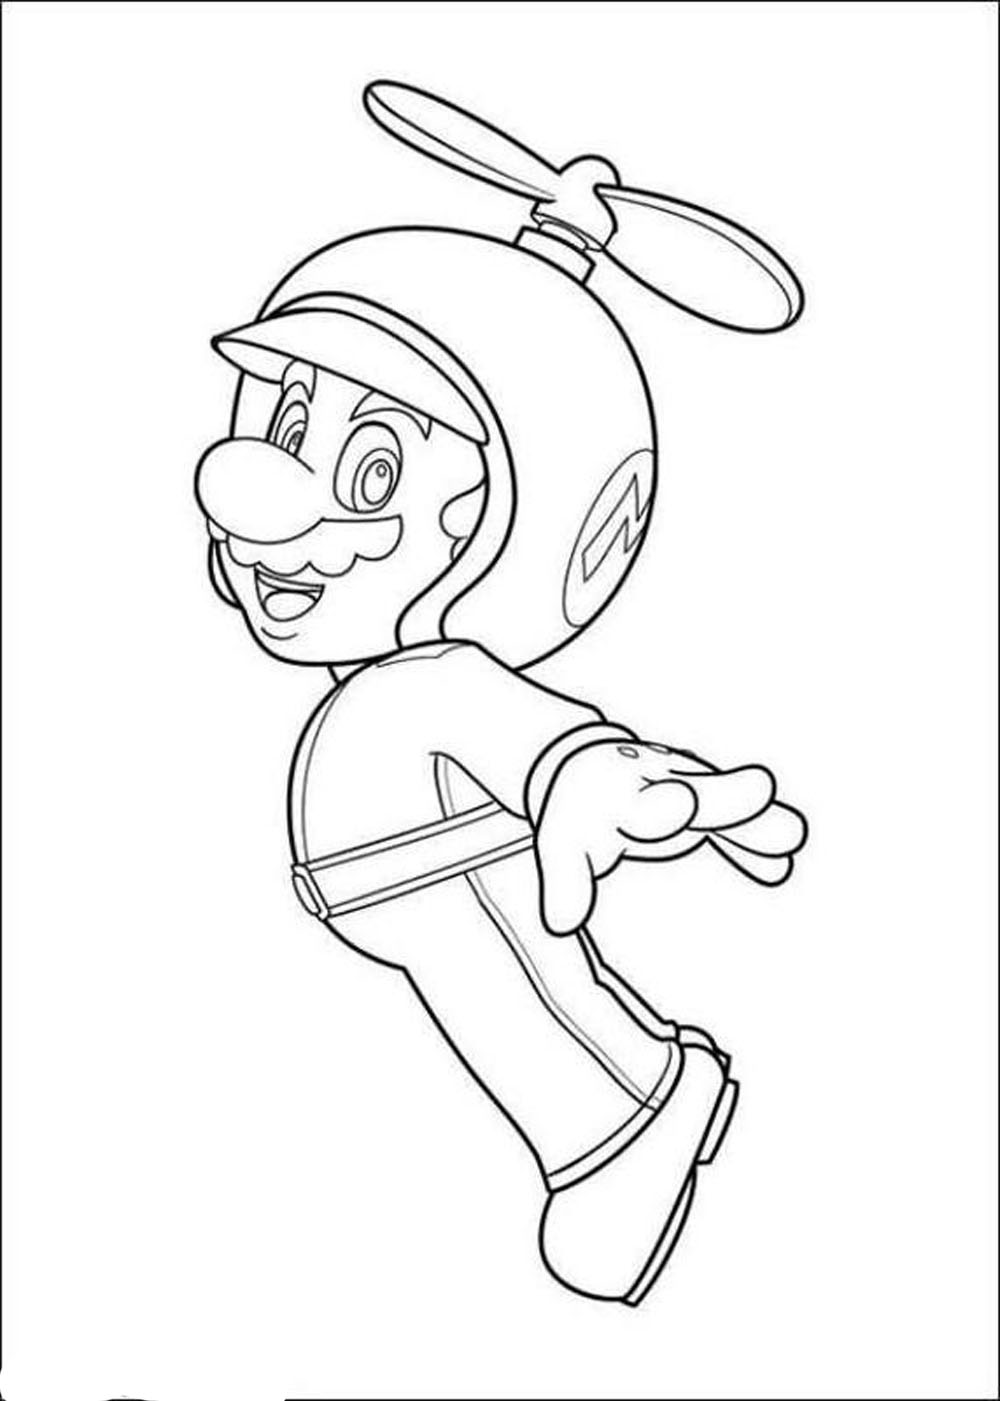 20-free-super-mario-coloring-pages-for-kids